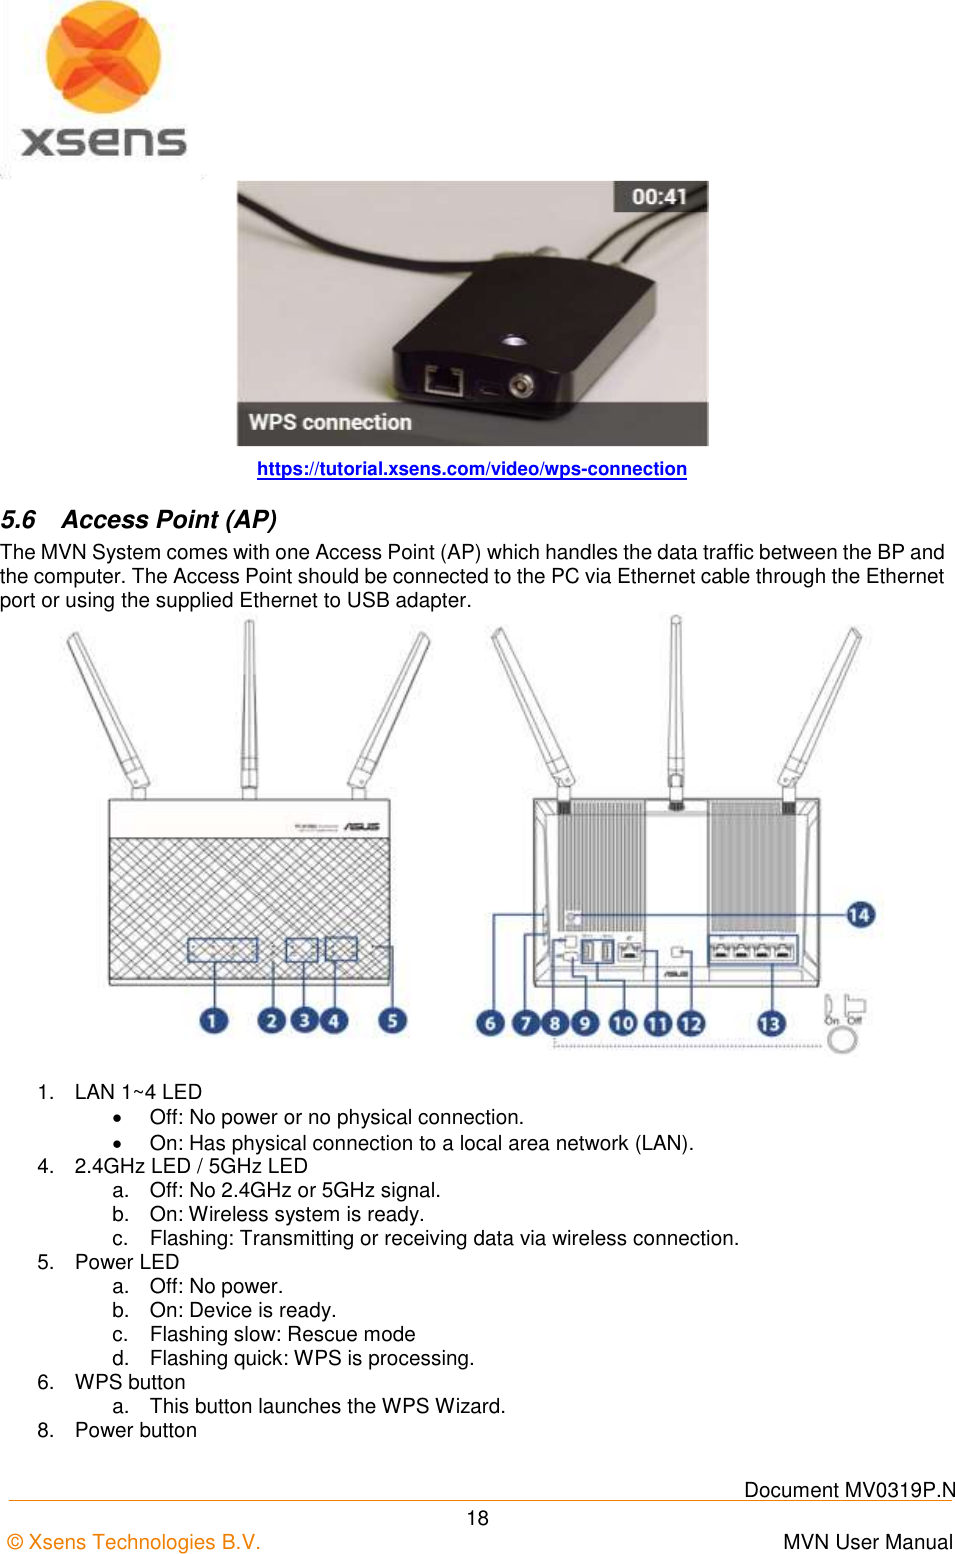    Document MV0319P.N © Xsens Technologies B.V.      MVN User Manual  18  https://tutorial.xsens.com/video/wps-connection 5.6  Access Point (AP) The MVN System comes with one Access Point (AP) which handles the data traffic between the BP and the computer. The Access Point should be connected to the PC via Ethernet cable through the Ethernet port or using the supplied Ethernet to USB adapter.   1.  LAN 1~4 LED   Off: No power or no physical connection.   On: Has physical connection to a local area network (LAN). 4.  2.4GHz LED / 5GHz LED a.  Off: No 2.4GHz or 5GHz signal. b.  On: Wireless system is ready. c.  Flashing: Transmitting or receiving data via wireless connection. 5.  Power LED a.  Off: No power. b.  On: Device is ready. c.  Flashing slow: Rescue mode d.  Flashing quick: WPS is processing. 6.  WPS button a.  This button launches the WPS Wizard. 8.  Power button 